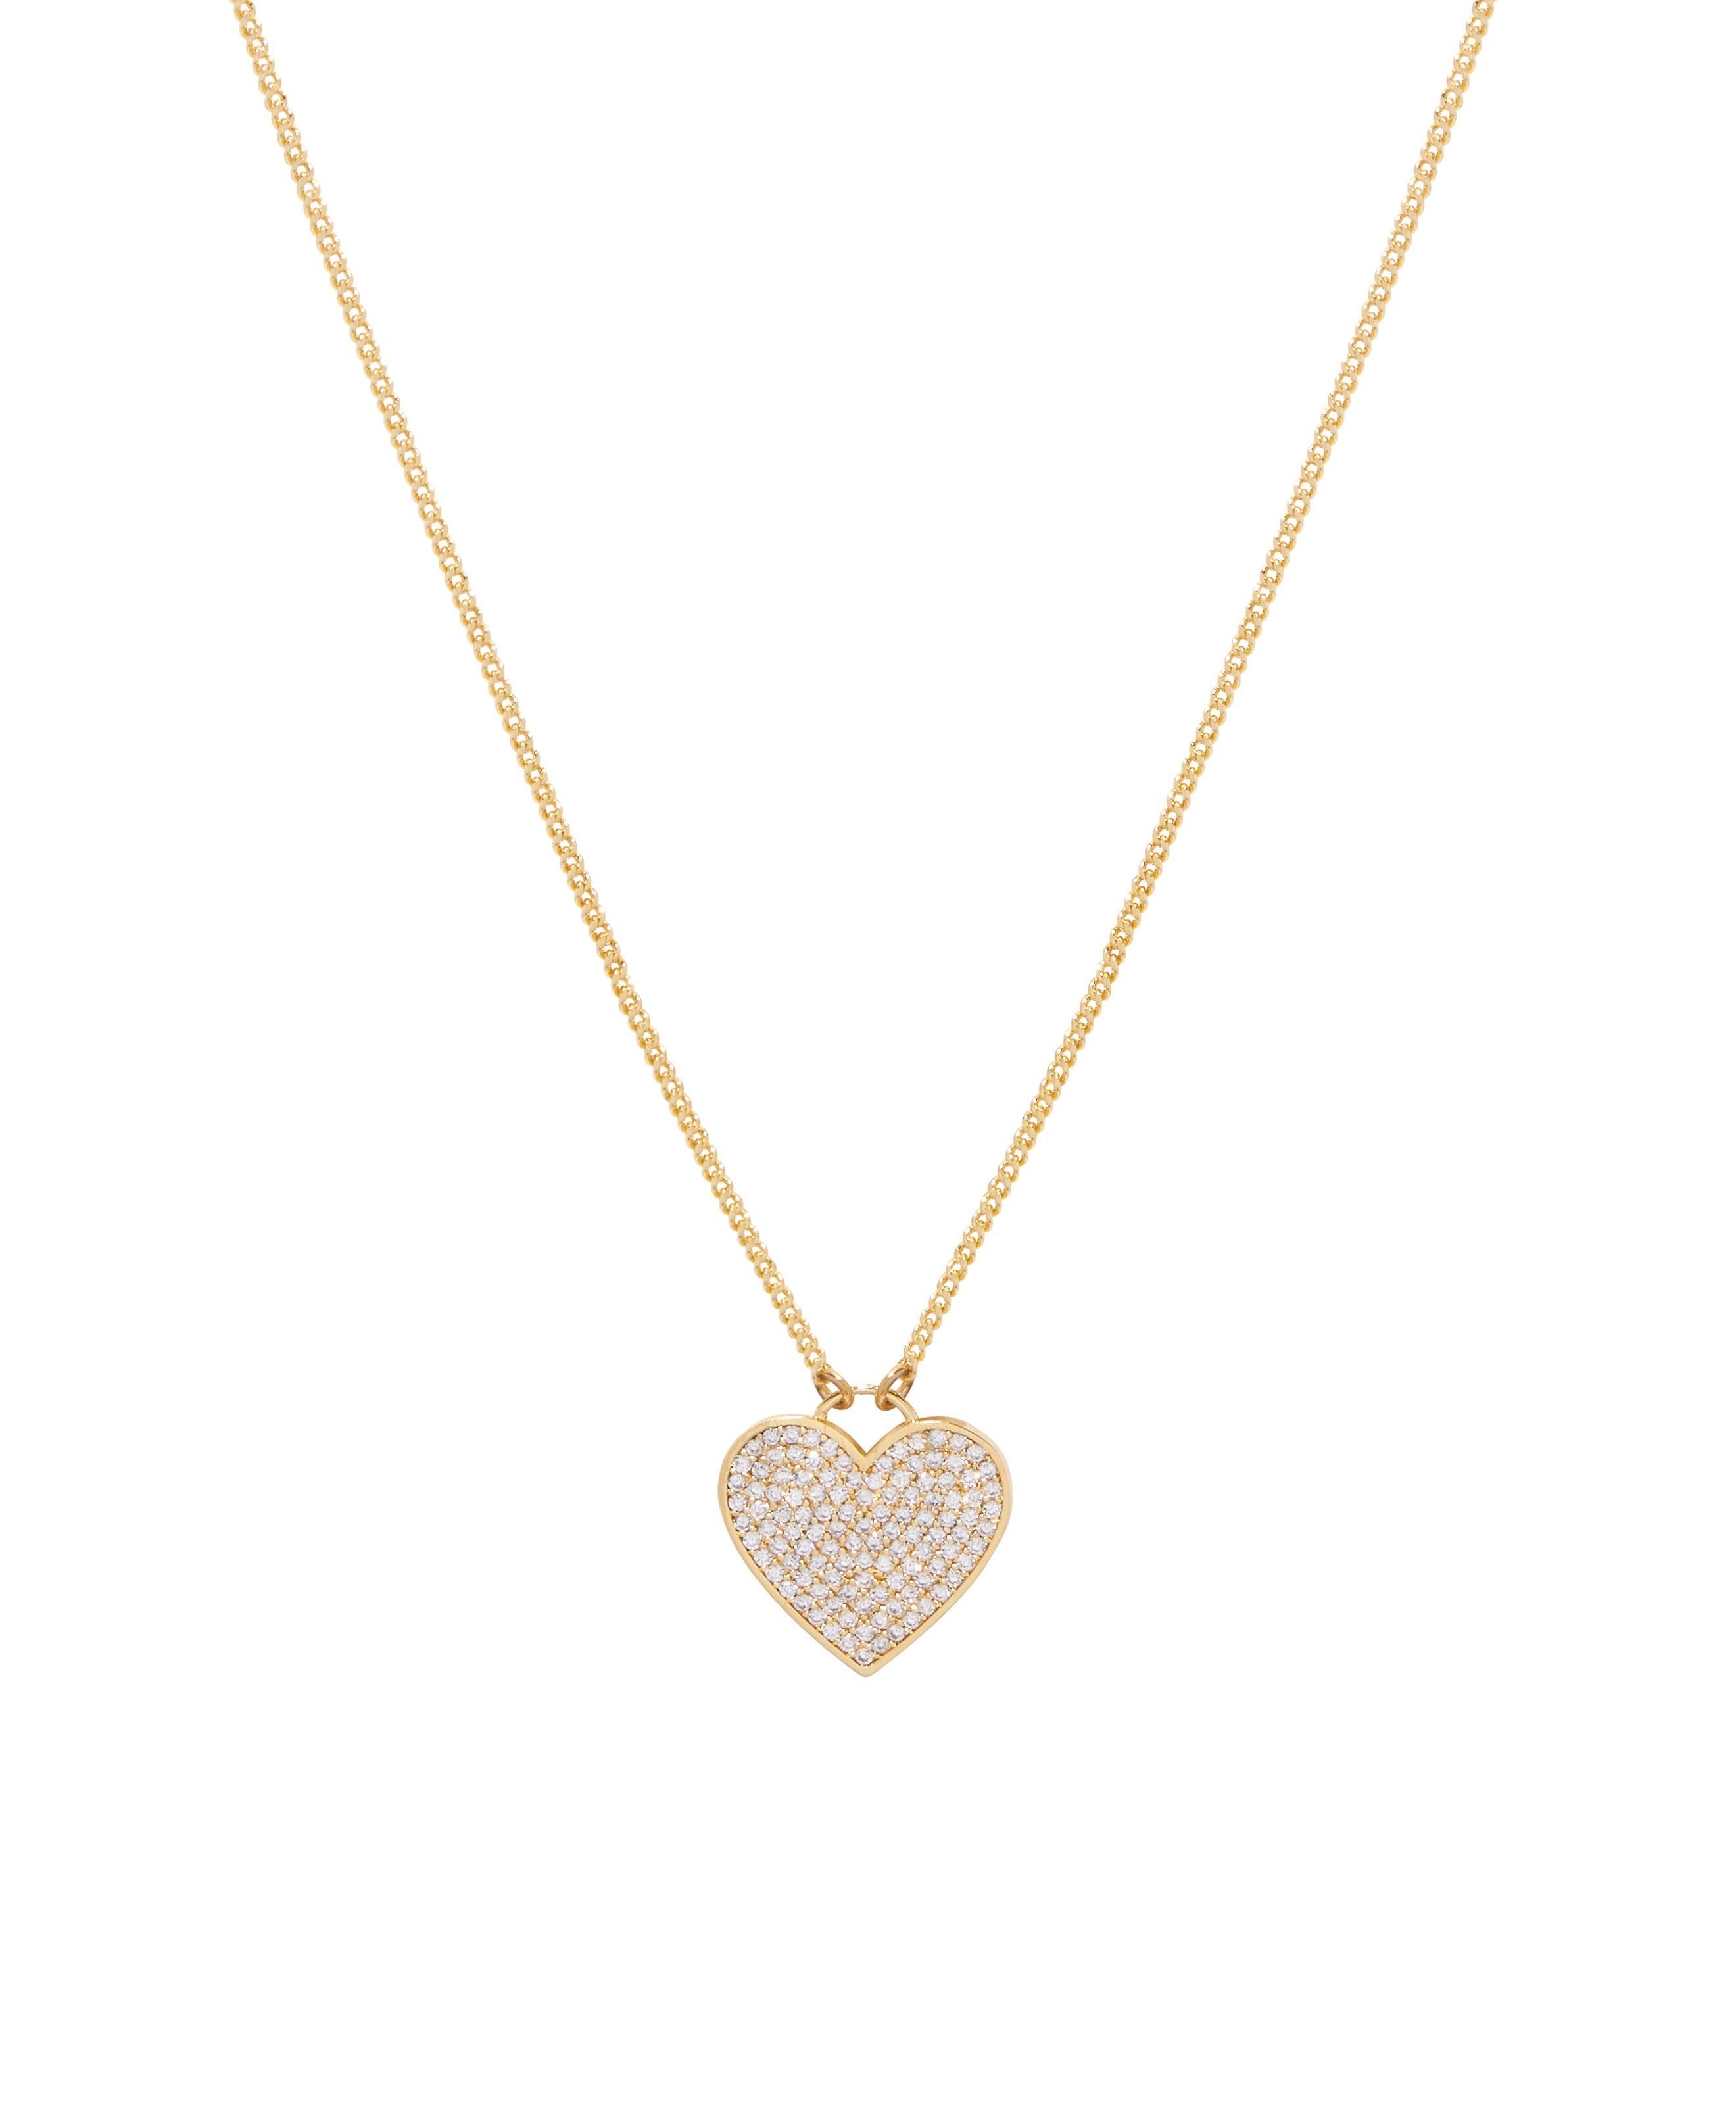 gold necklace with a shimmery heart pendant on the bottom